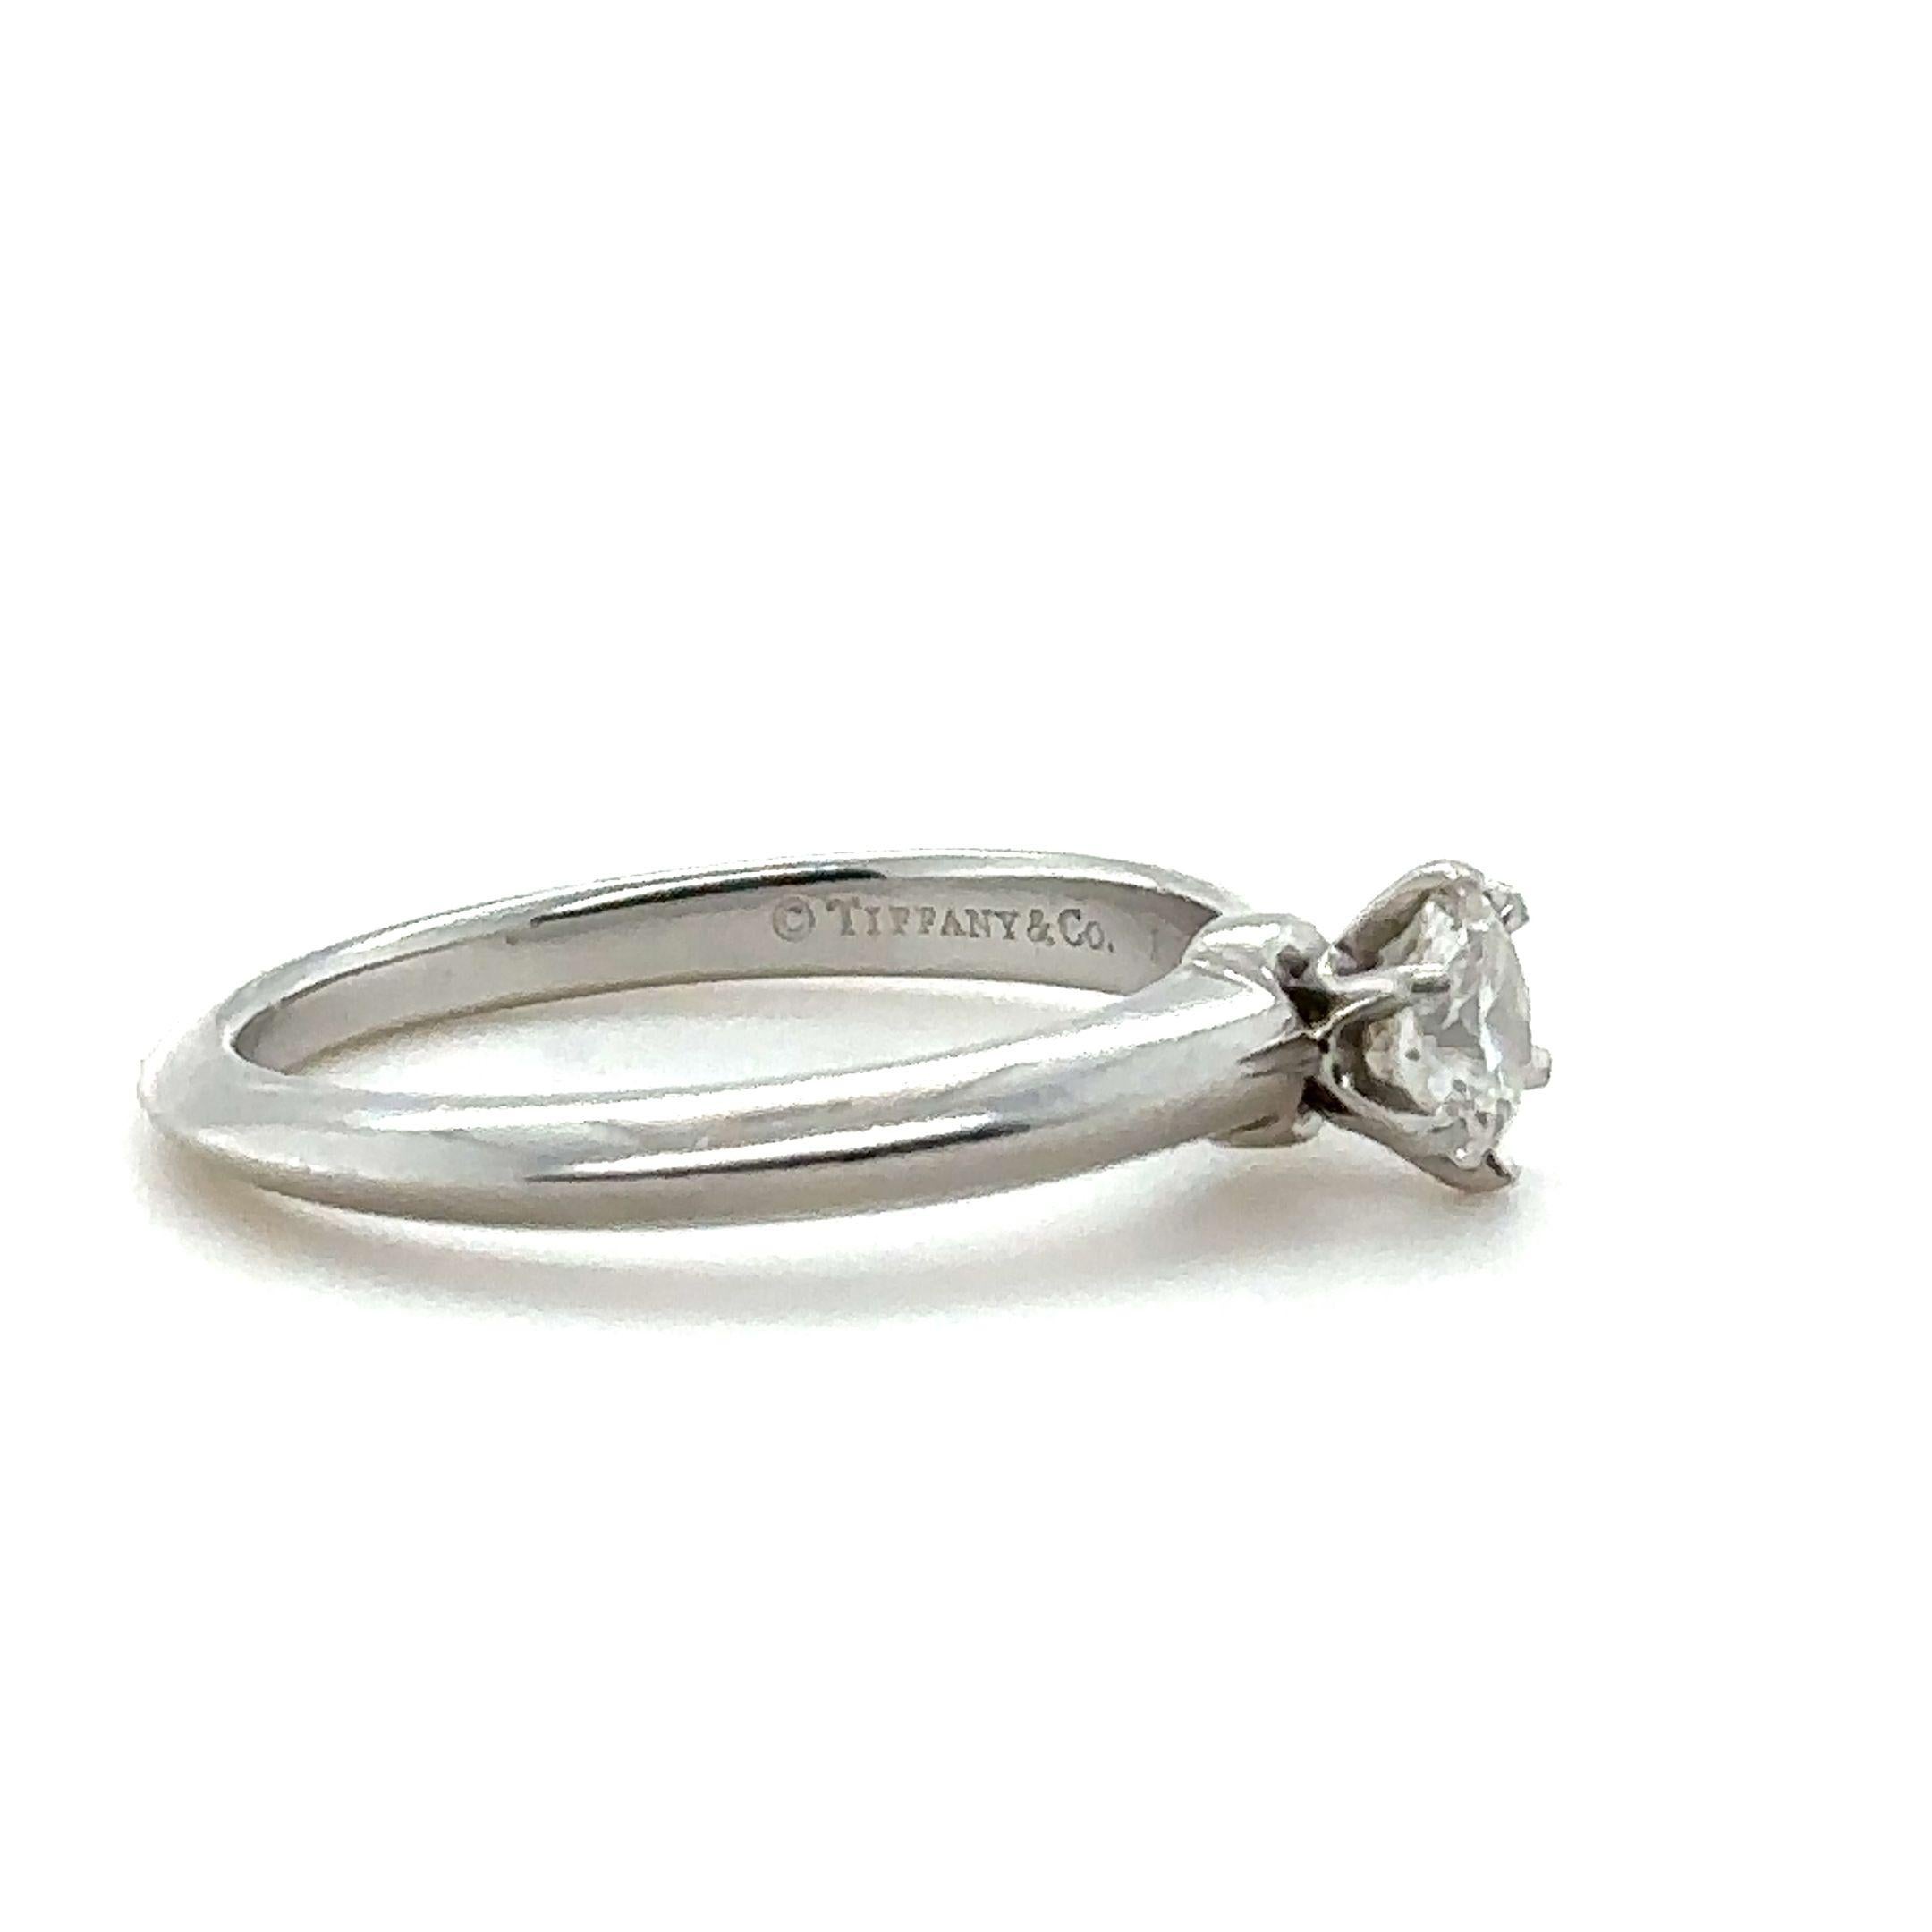 Tiffany & Co. Diamond Engagement ring, made of 950 Platinum, and weighing 5.4 grams.

Set with a Round, brilliant cut Diamond, colour H, and clarity VVS2. Weighing 0.52 ct. Laser inscribed: T&Co K01200168.

Metal: Platinum PT950
Carat: